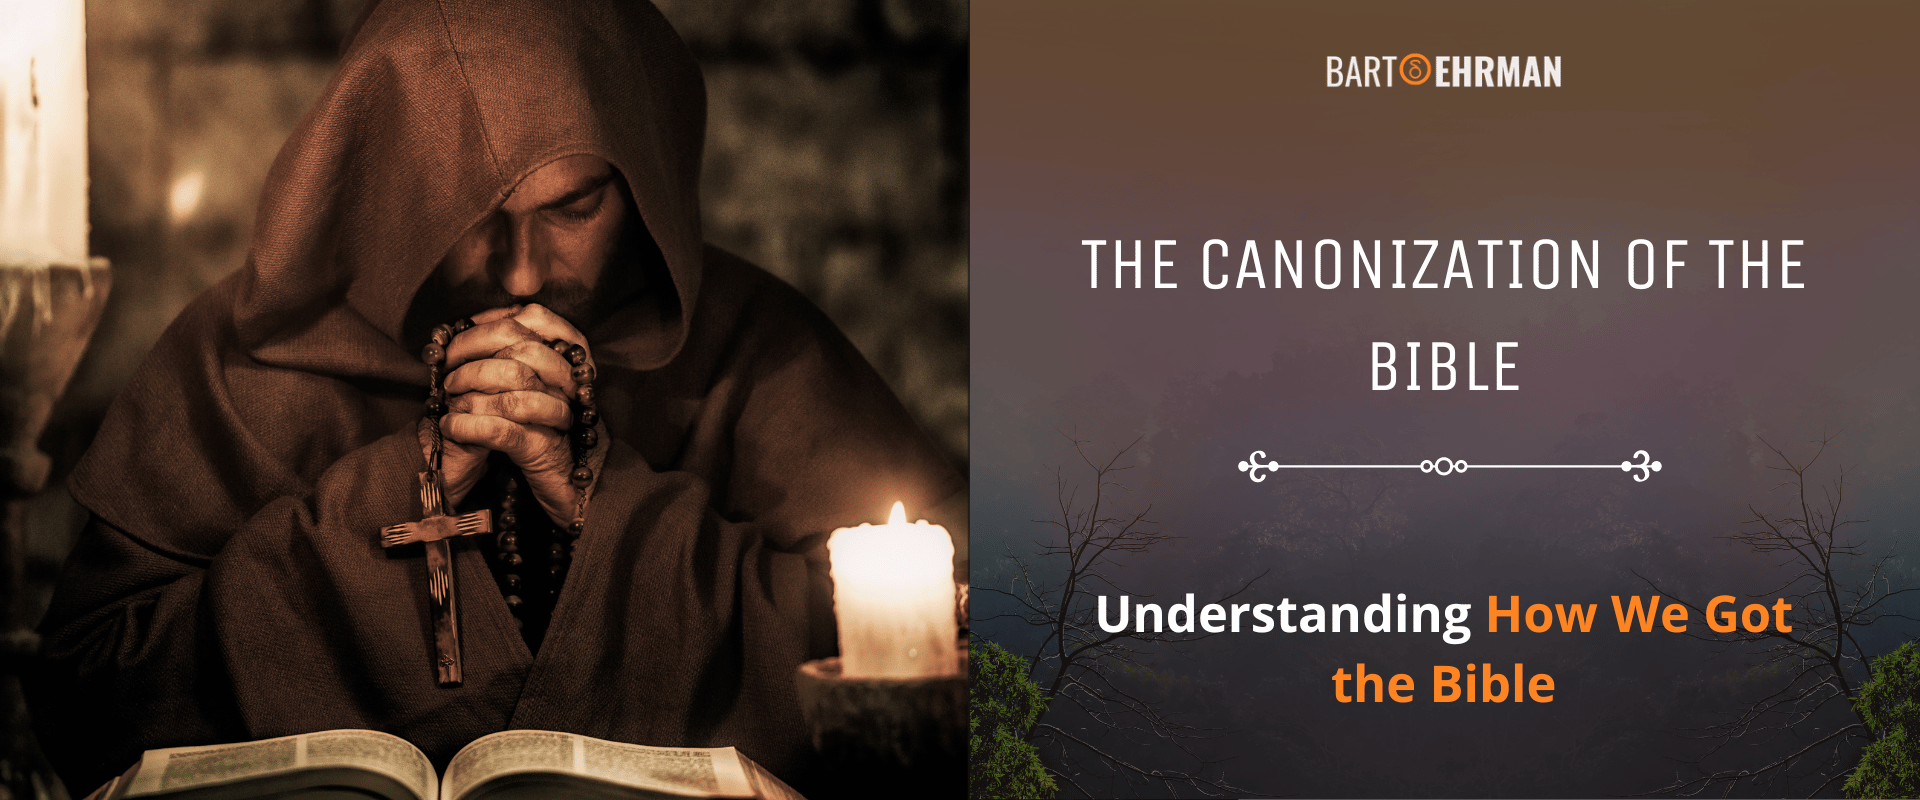 The Canonization of the Bible - Understanding How We Got the Bible